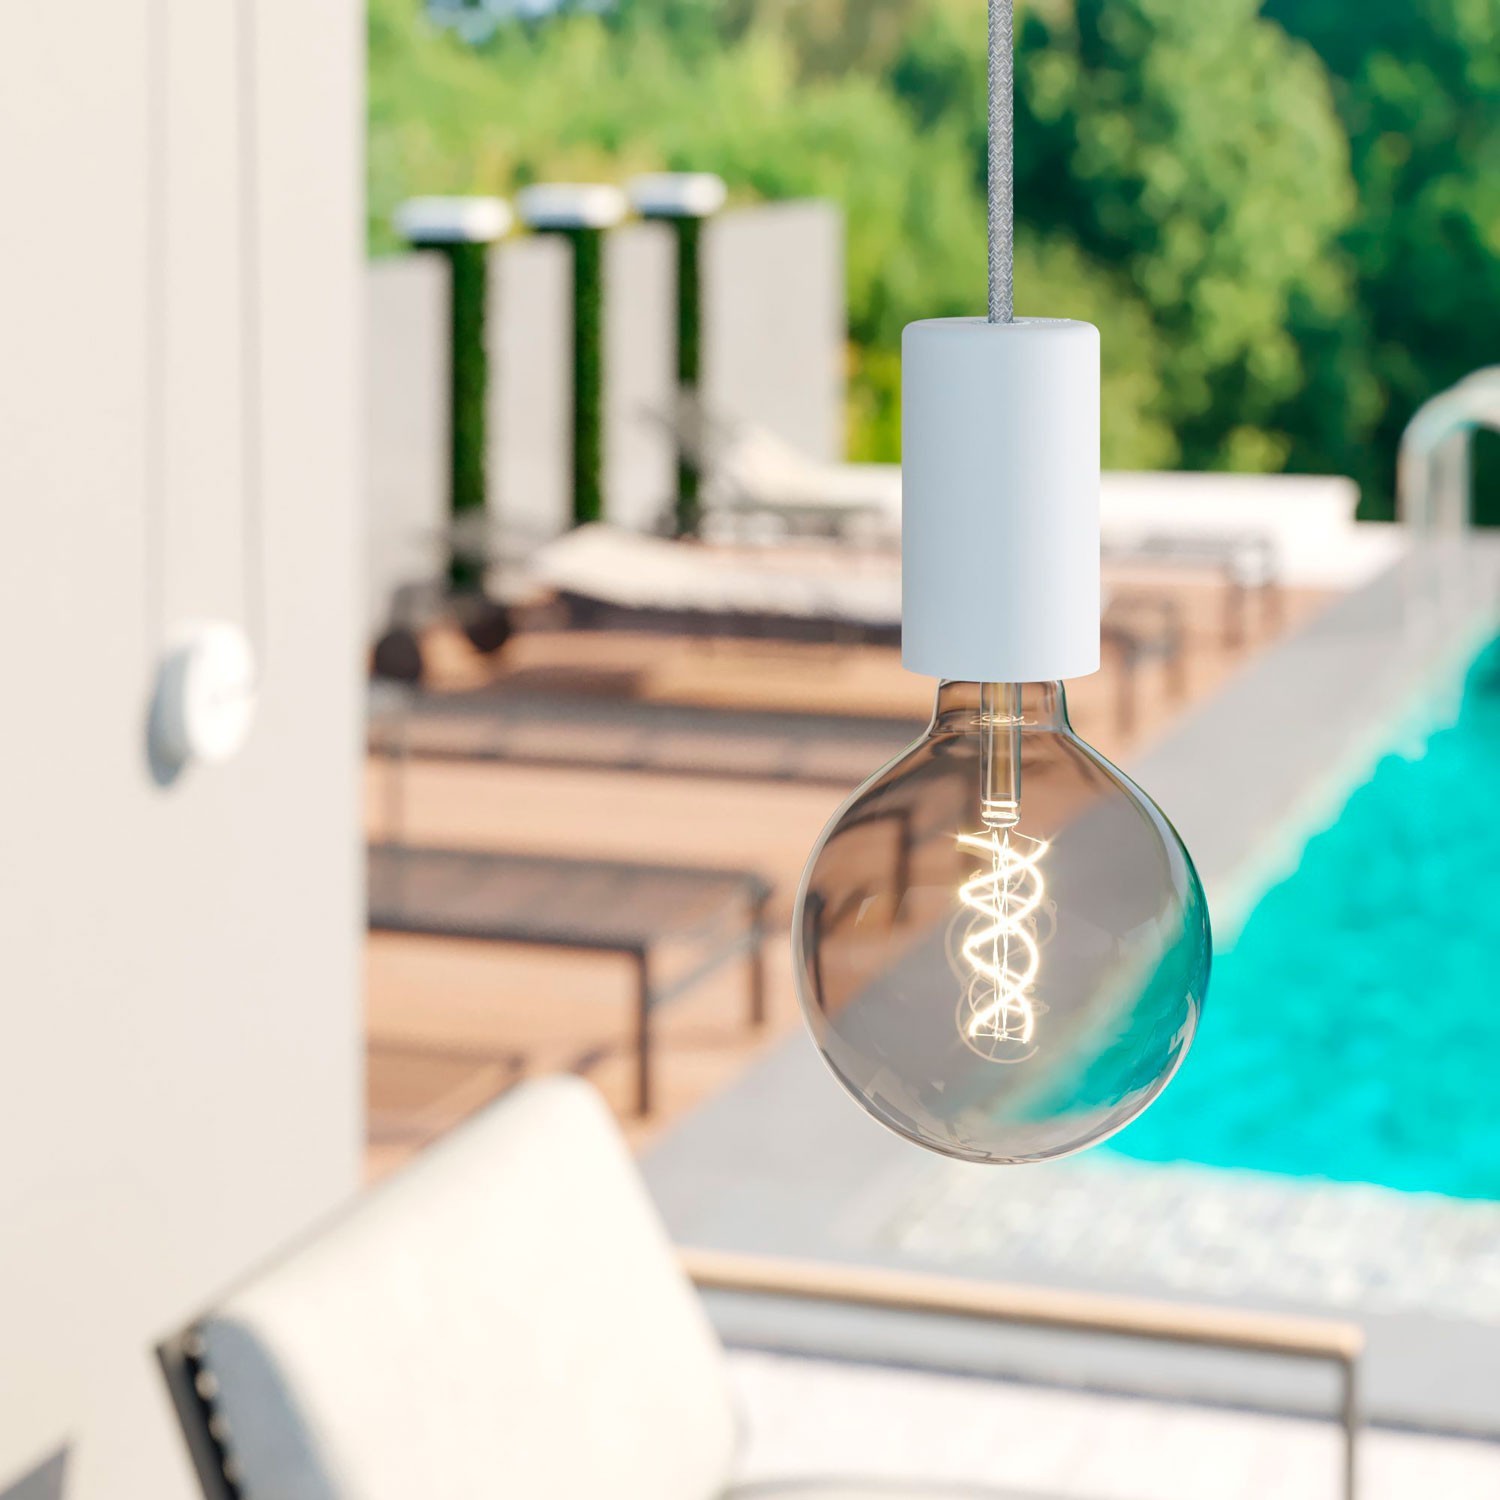 EIVA ELEGANT Outdoor pendant lamp with 5 mt fabric cable, decentralizer, ceiling rose and lamp holder IP65 water resistant